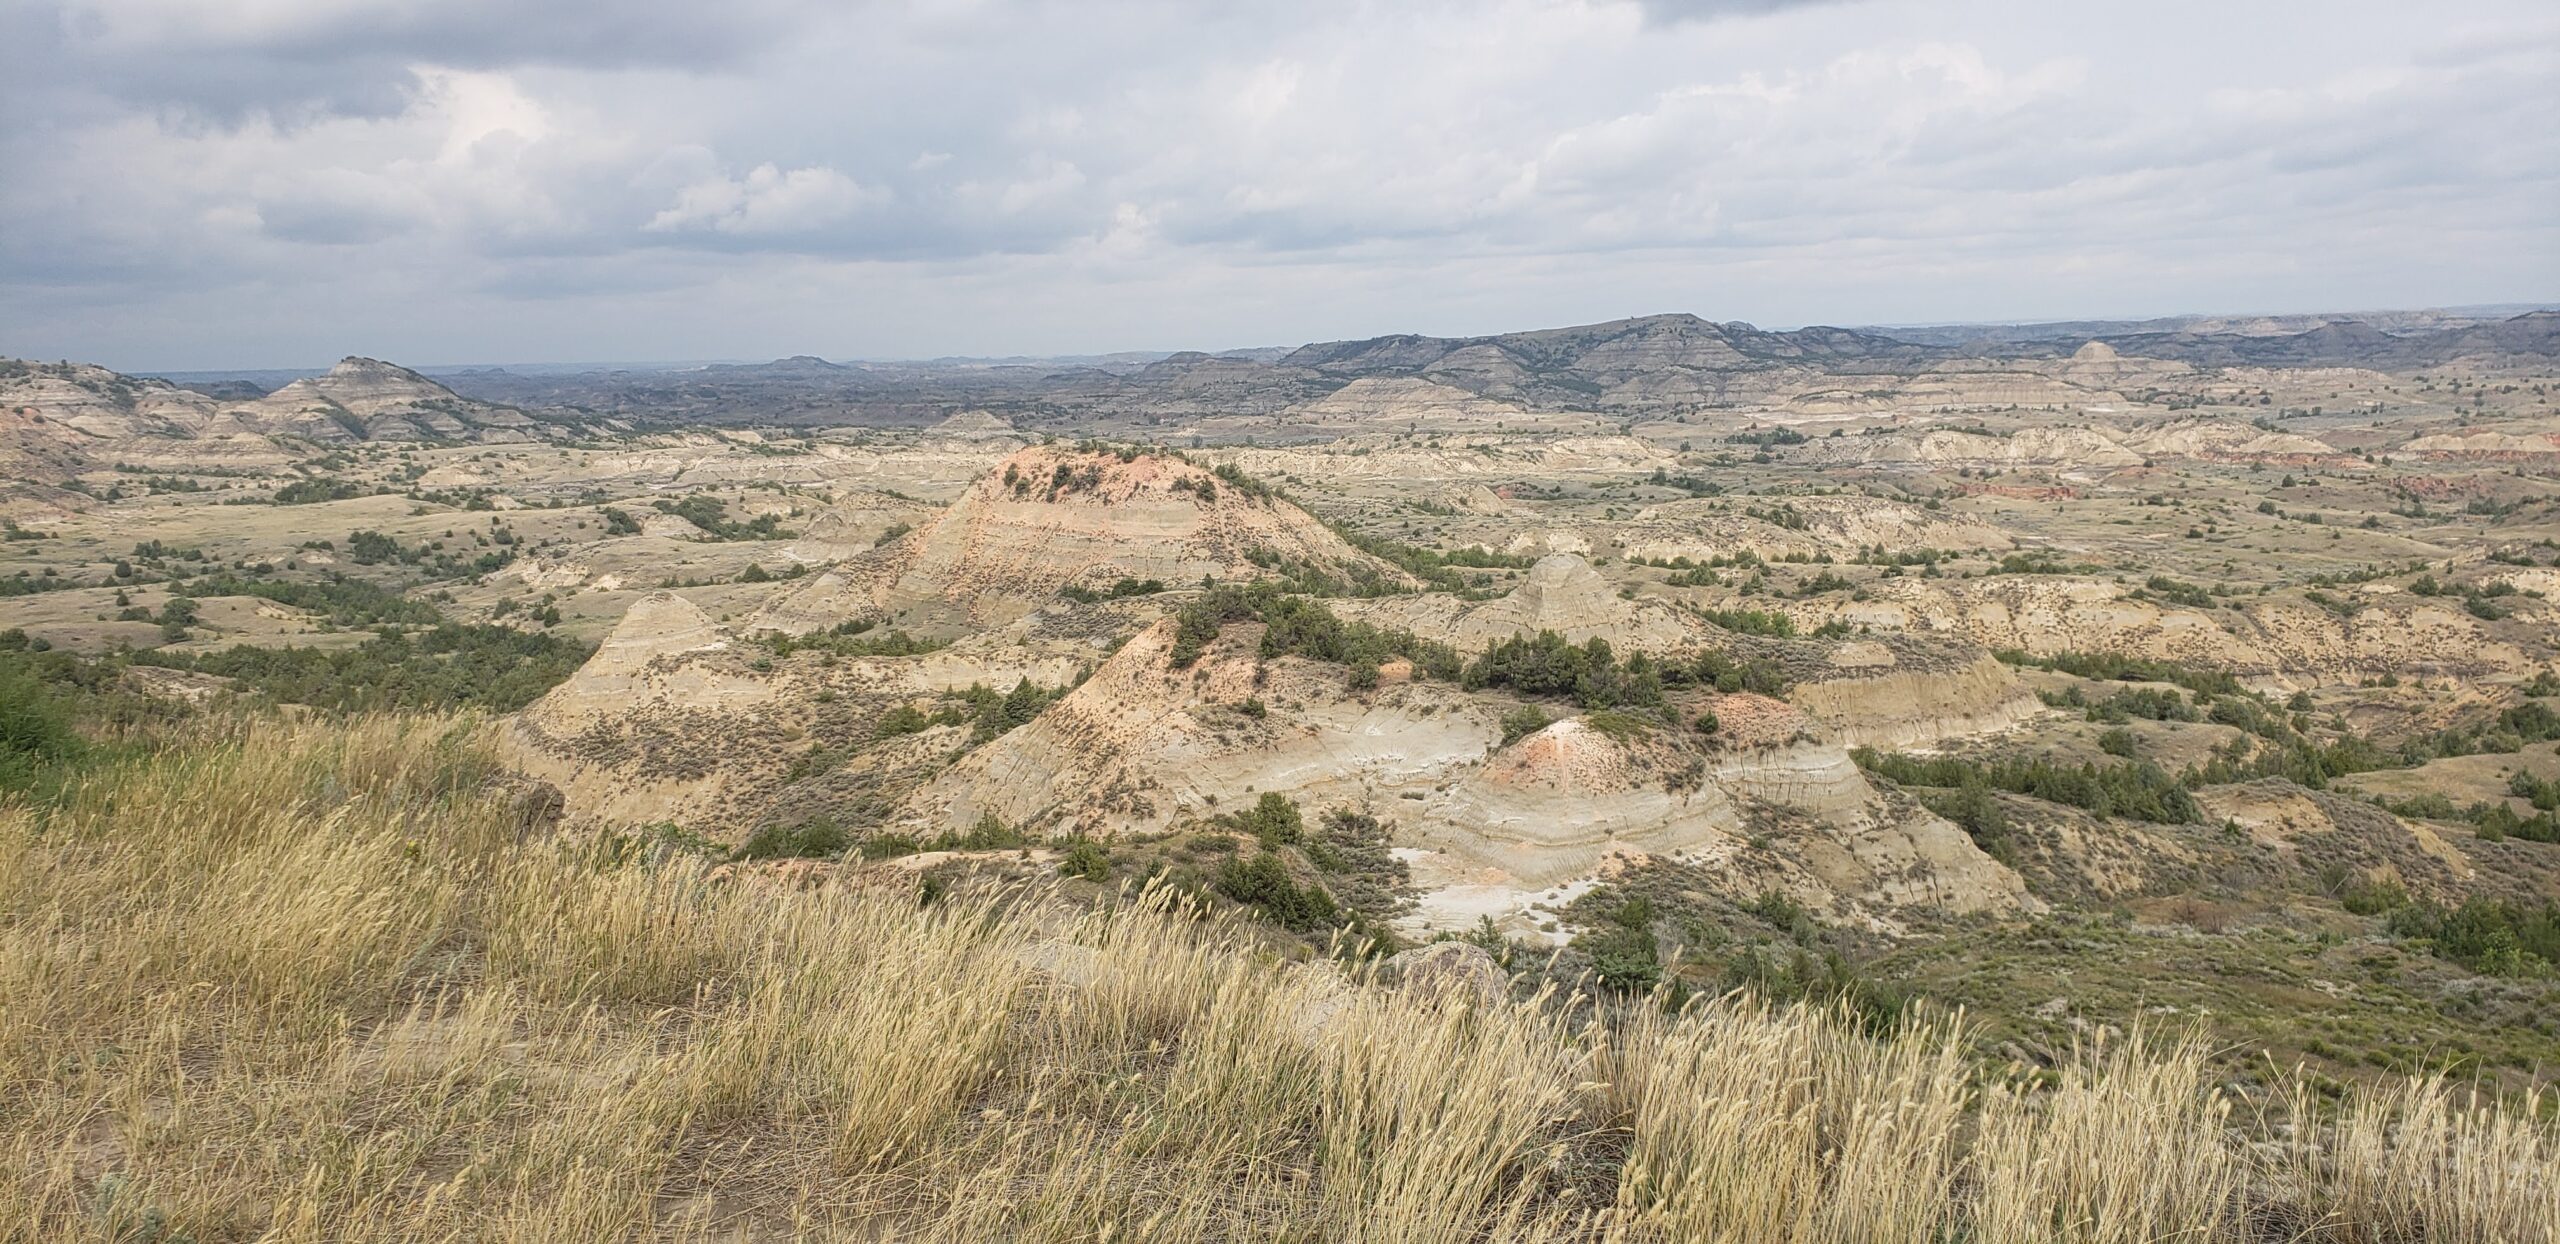 View of Theodore Roosevelt National Park from Painted Canyon Visitor Center